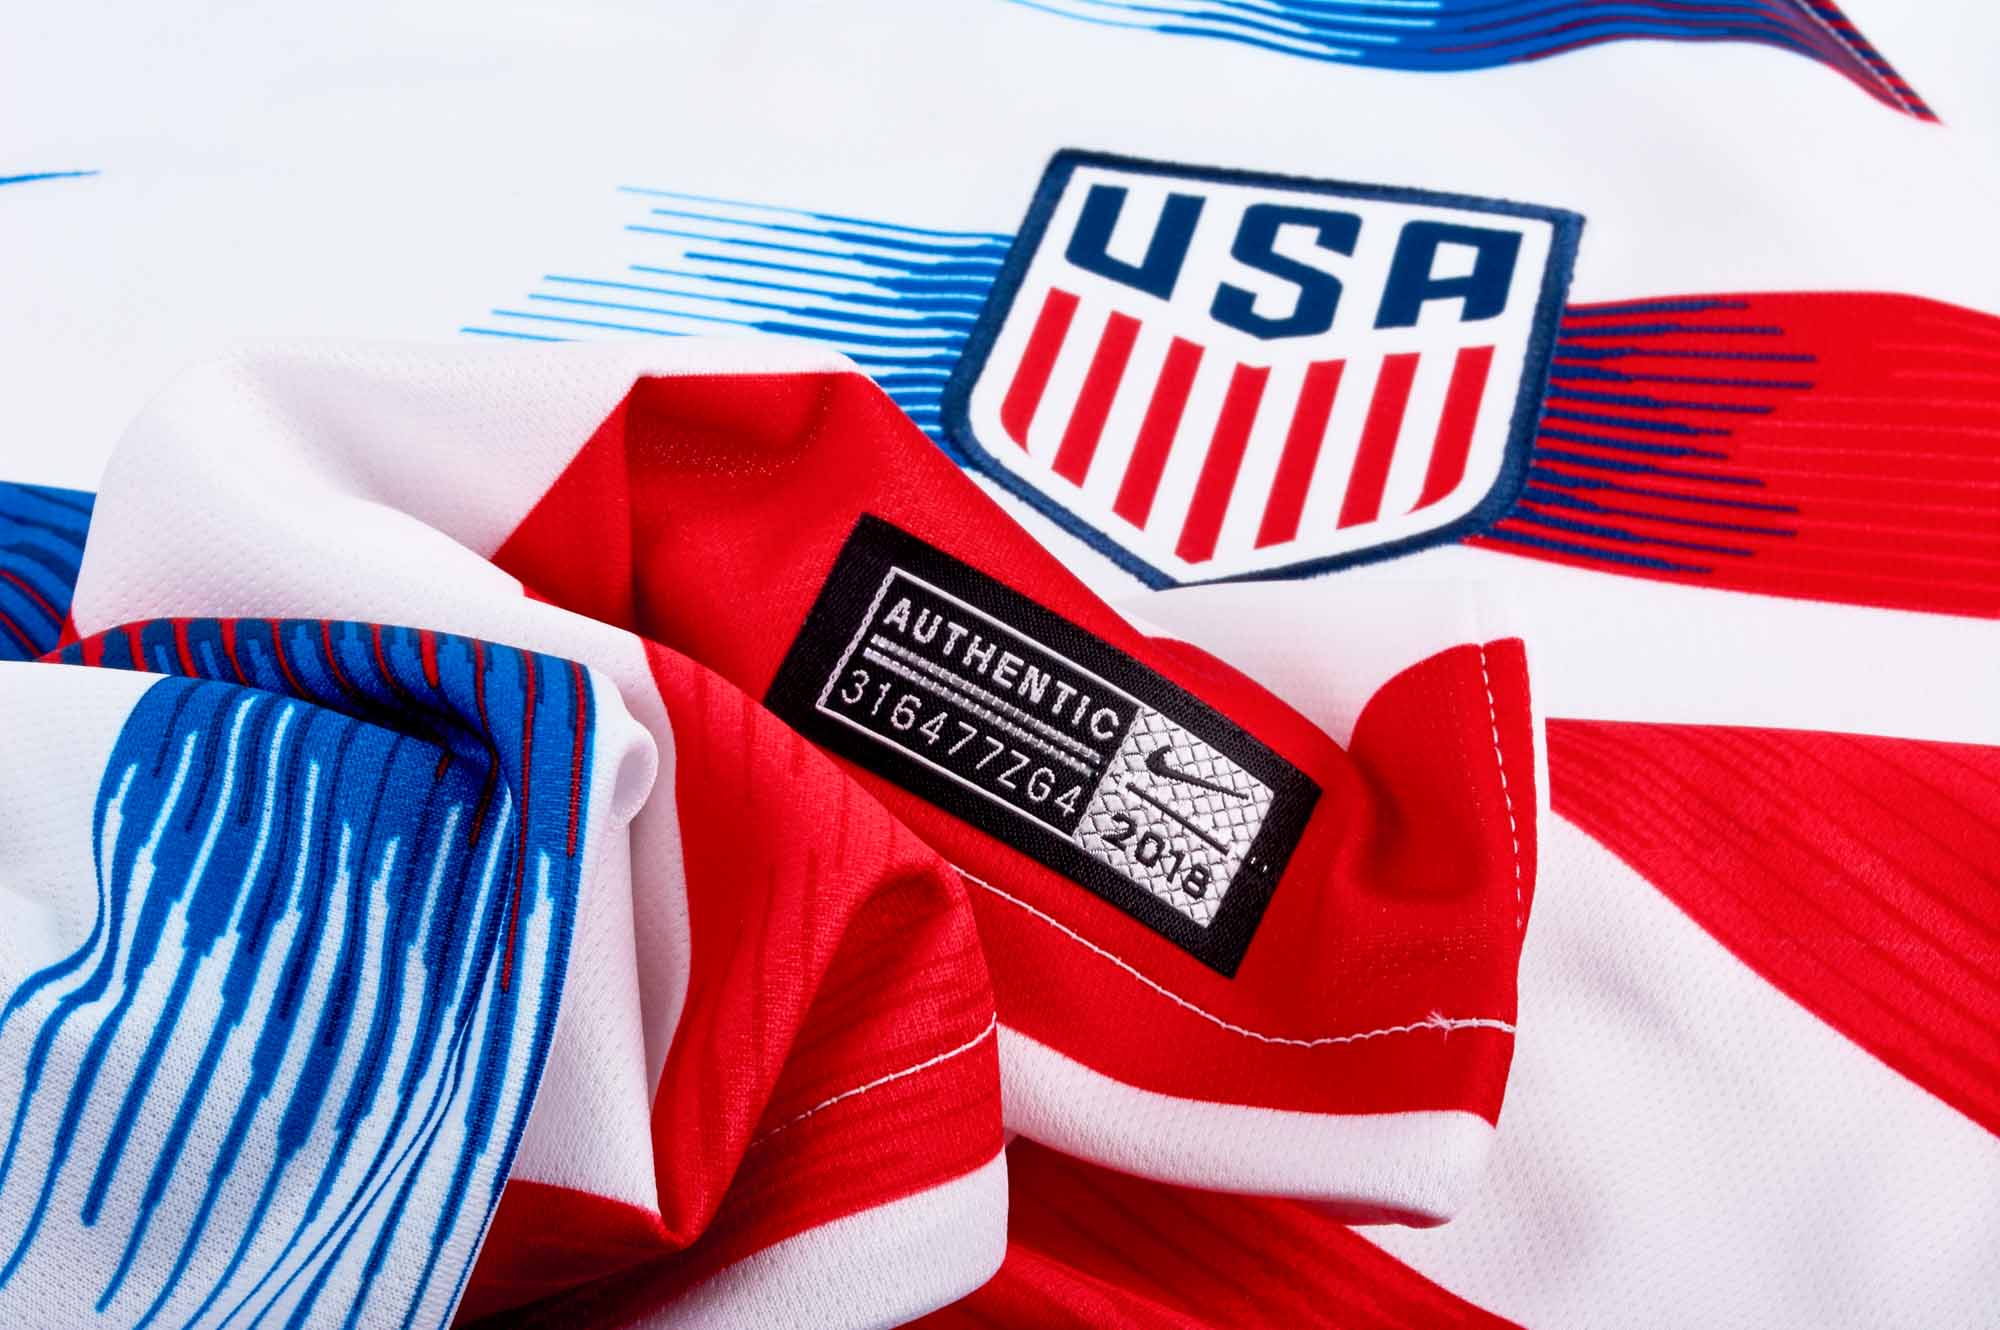 Buy Nike Youth Christian Pulisic USA Home Jersey 2018-19, White/Red/Blue,  Medium Online at Low Prices in India 